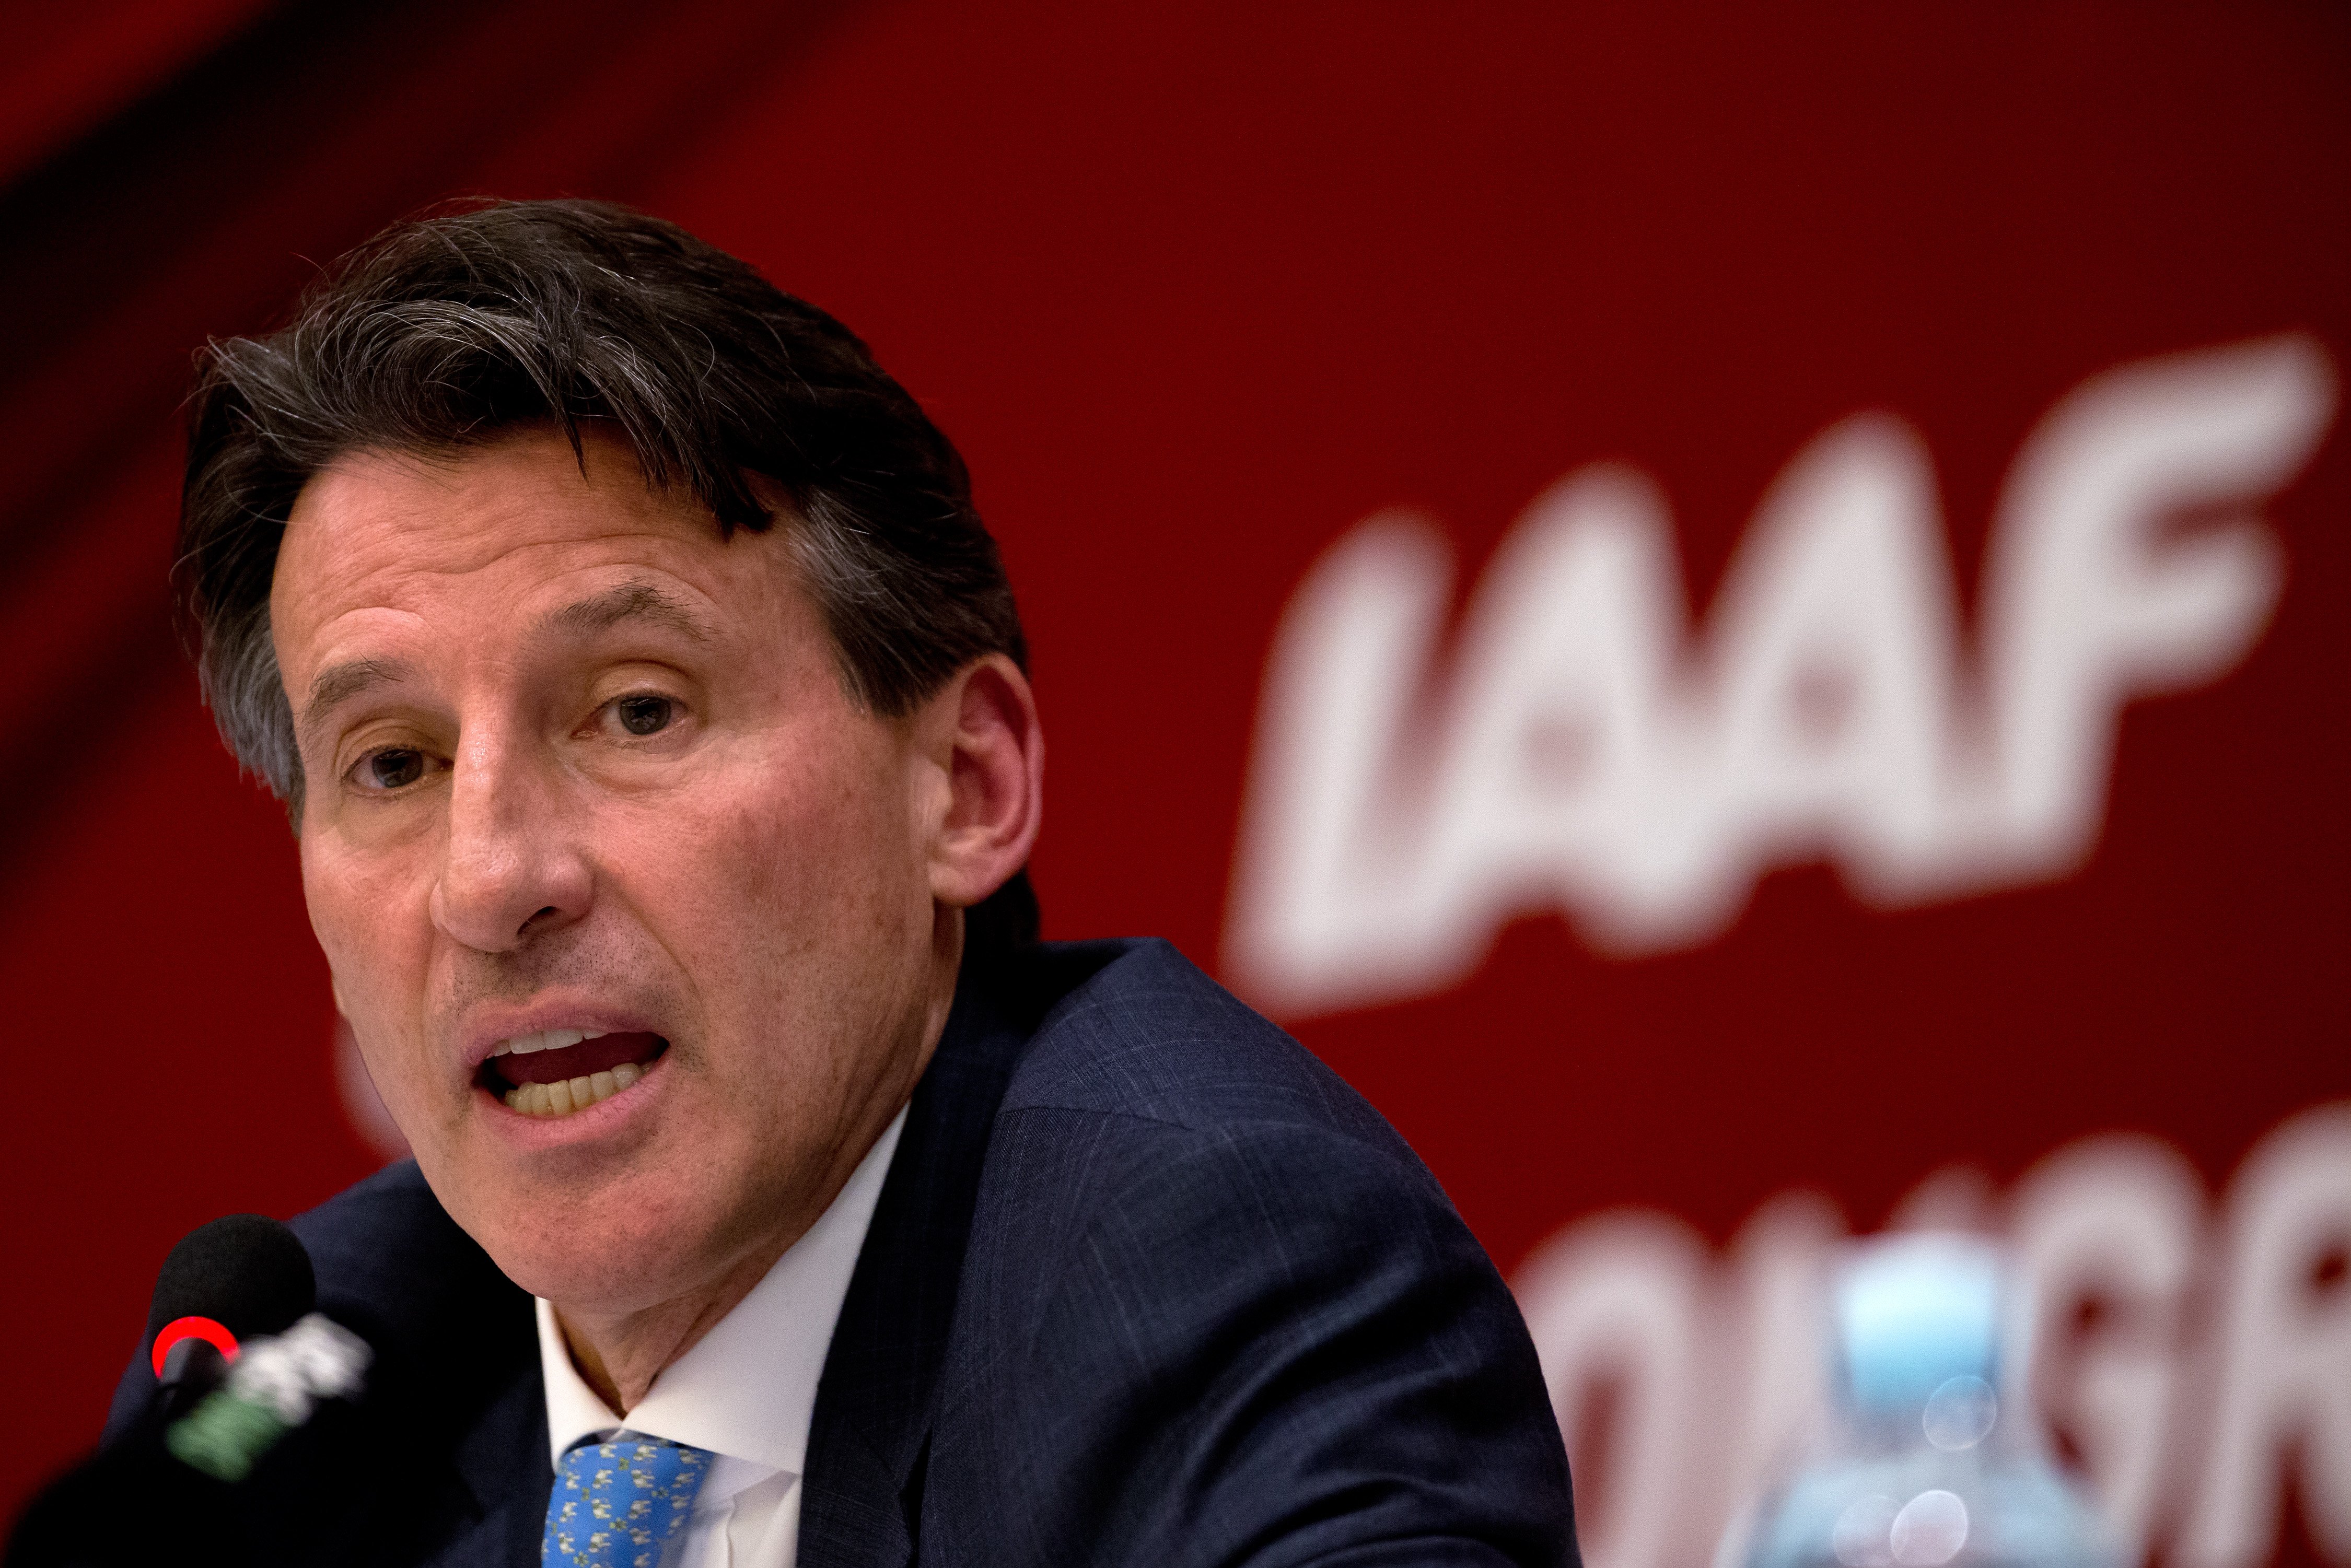 FILE - In this Wednesday, Aug. 19, 2015 file photo, newly elected International Association of Athletics Federations President Sebastian Coe speaks during a press briefing at the IAAF Congress at the National Convention Center in Beijing. The British government ordered ambassadors around the world to lobby athletics leaders to vote for Sebastian Coe in the IAAF presidential election, aiming to ensure “British interests are protected,” diplomatic messages obtained by The Associated Press reveal. (AP Photo/Andy Wong, File)